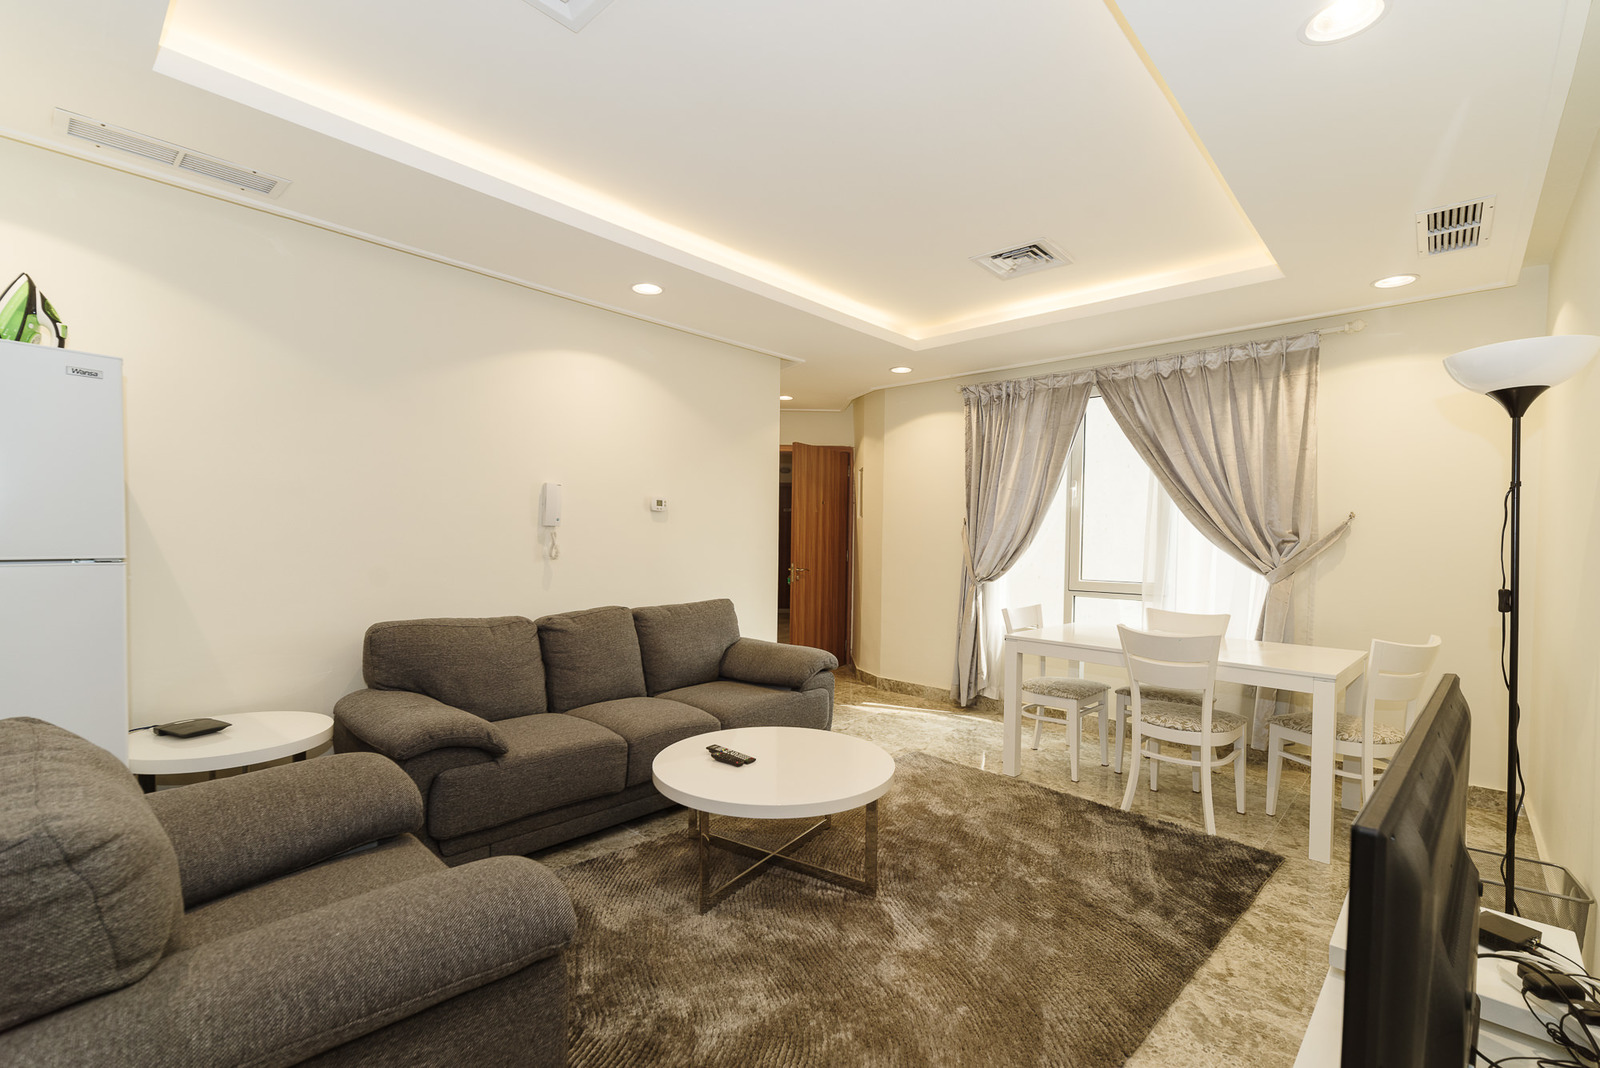 Fintas – nice, furnished, two bedroom apartments w/gym